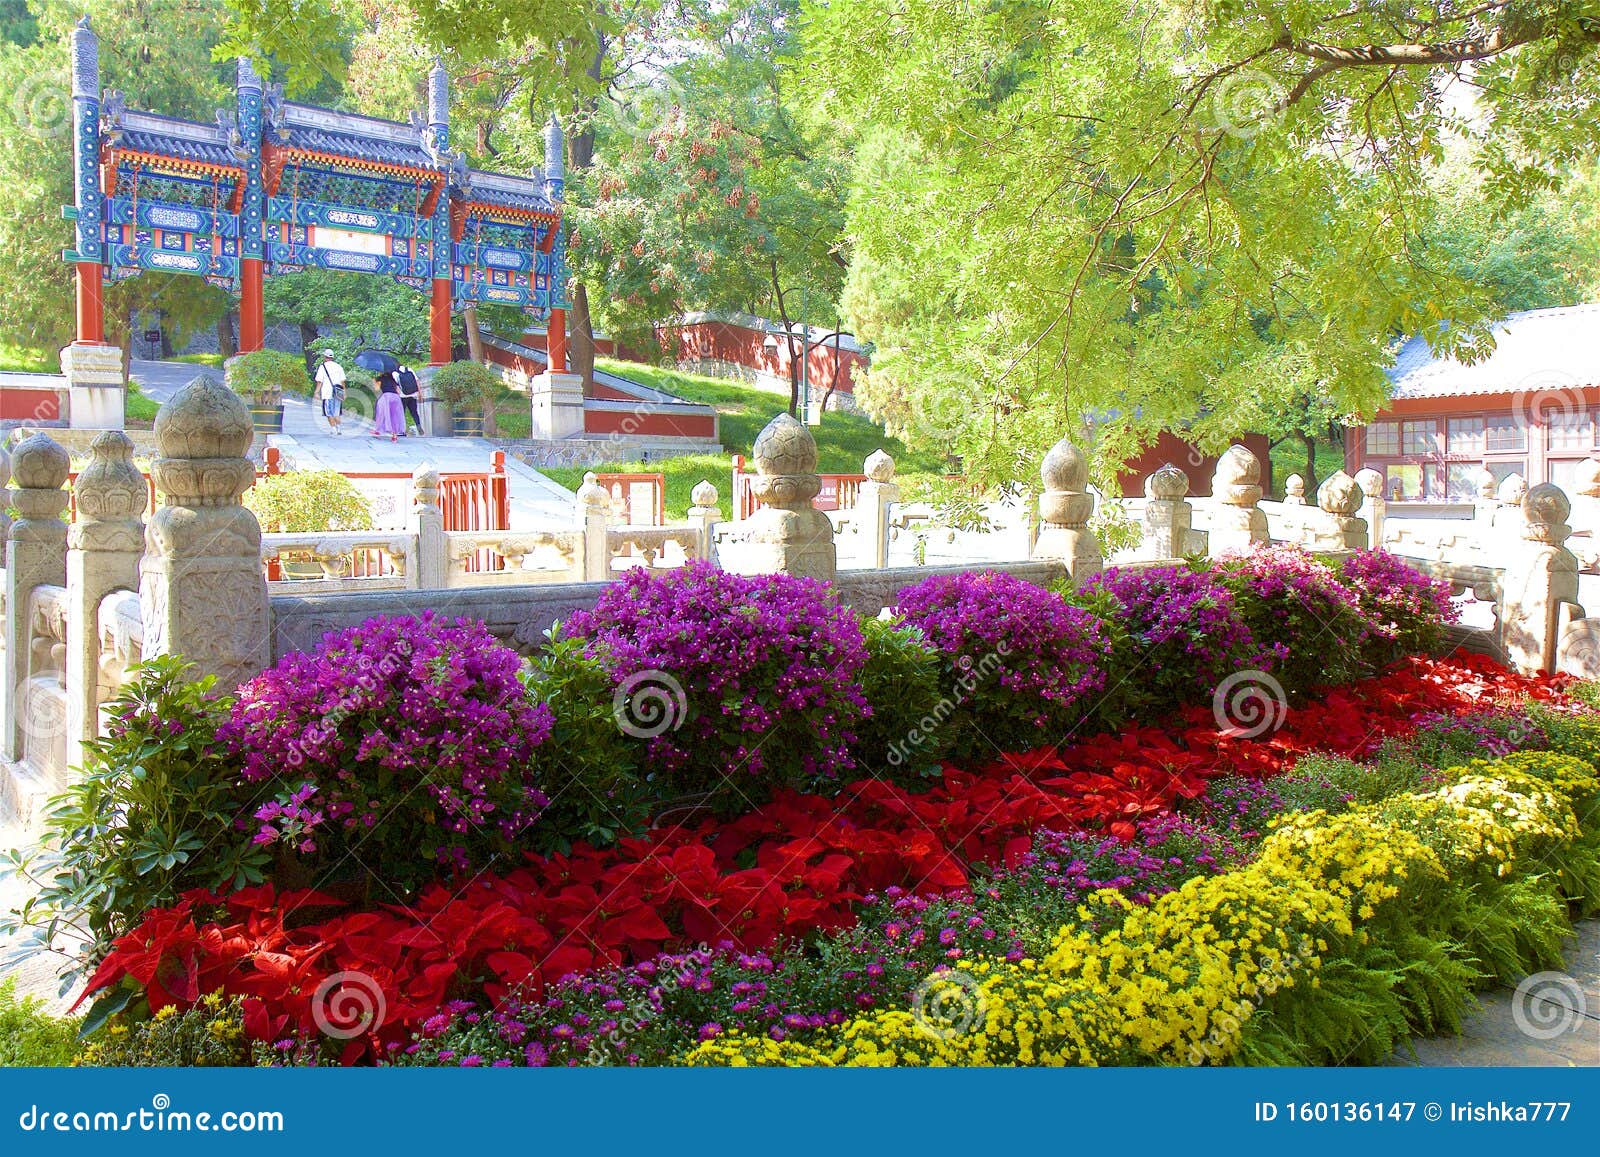 Fragrant Hills Park In Beijing China Editorial Photography